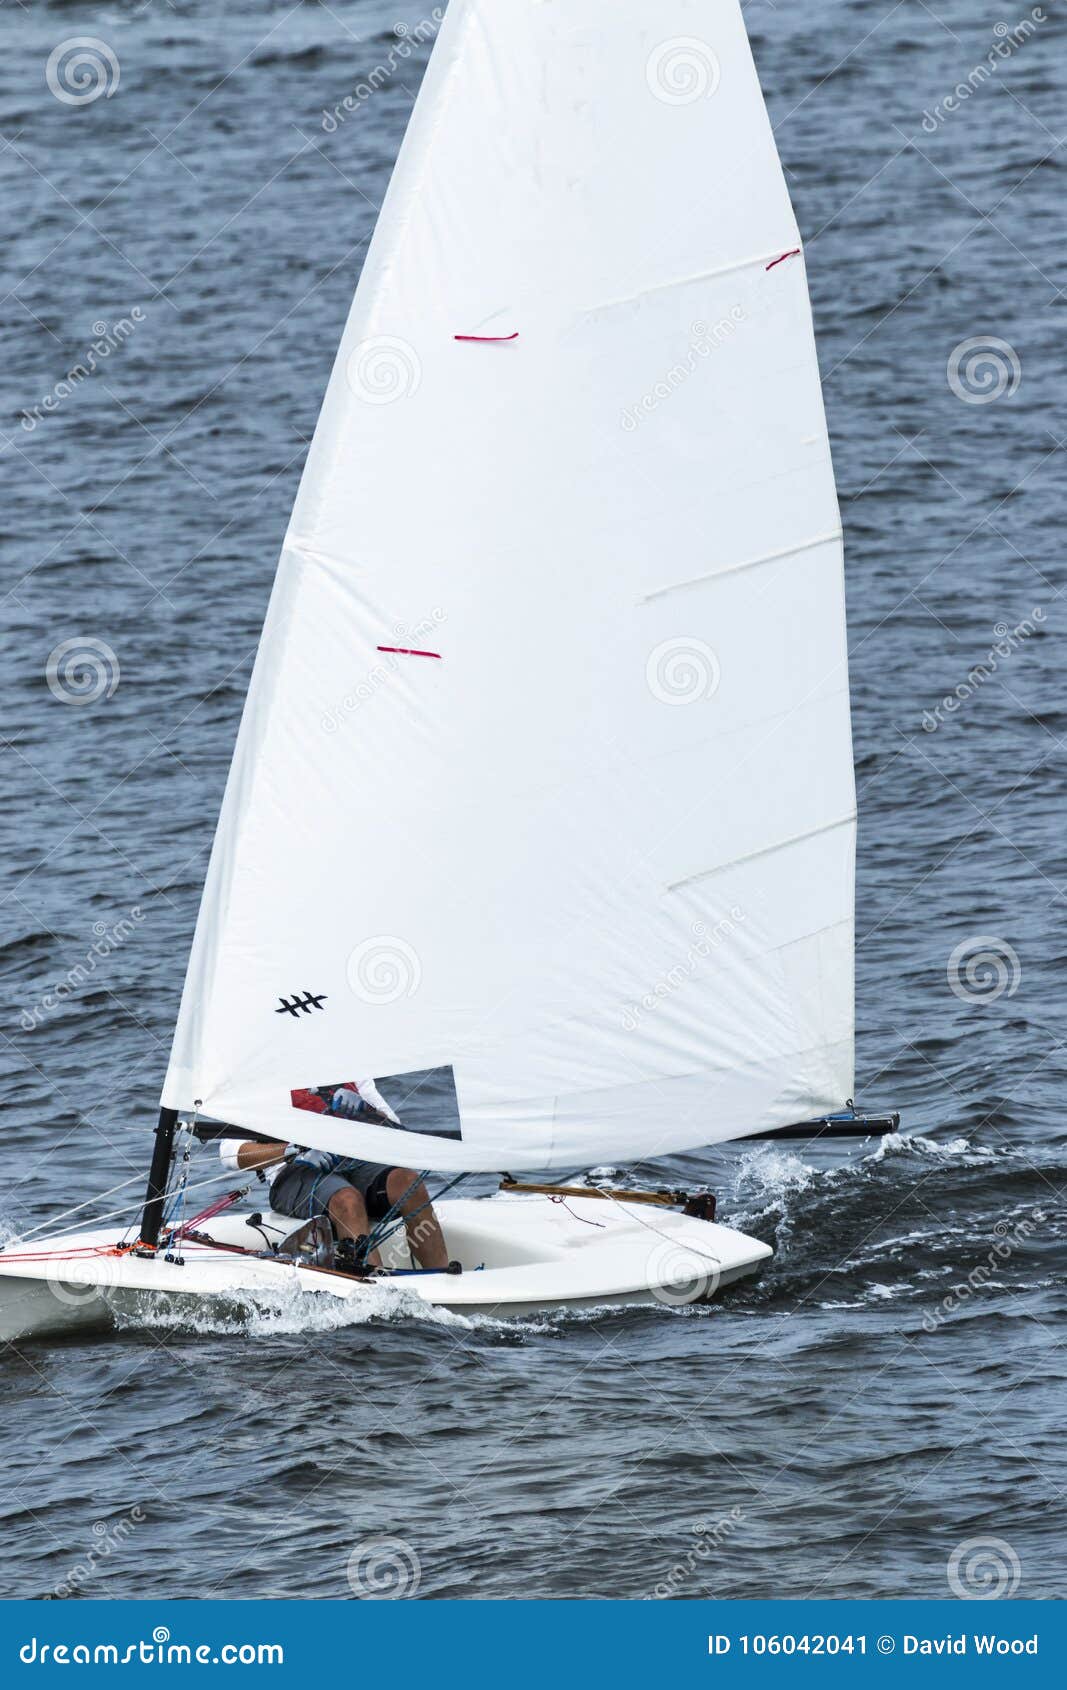 One Person Sailboat In The Water Stock Image - Image of ...